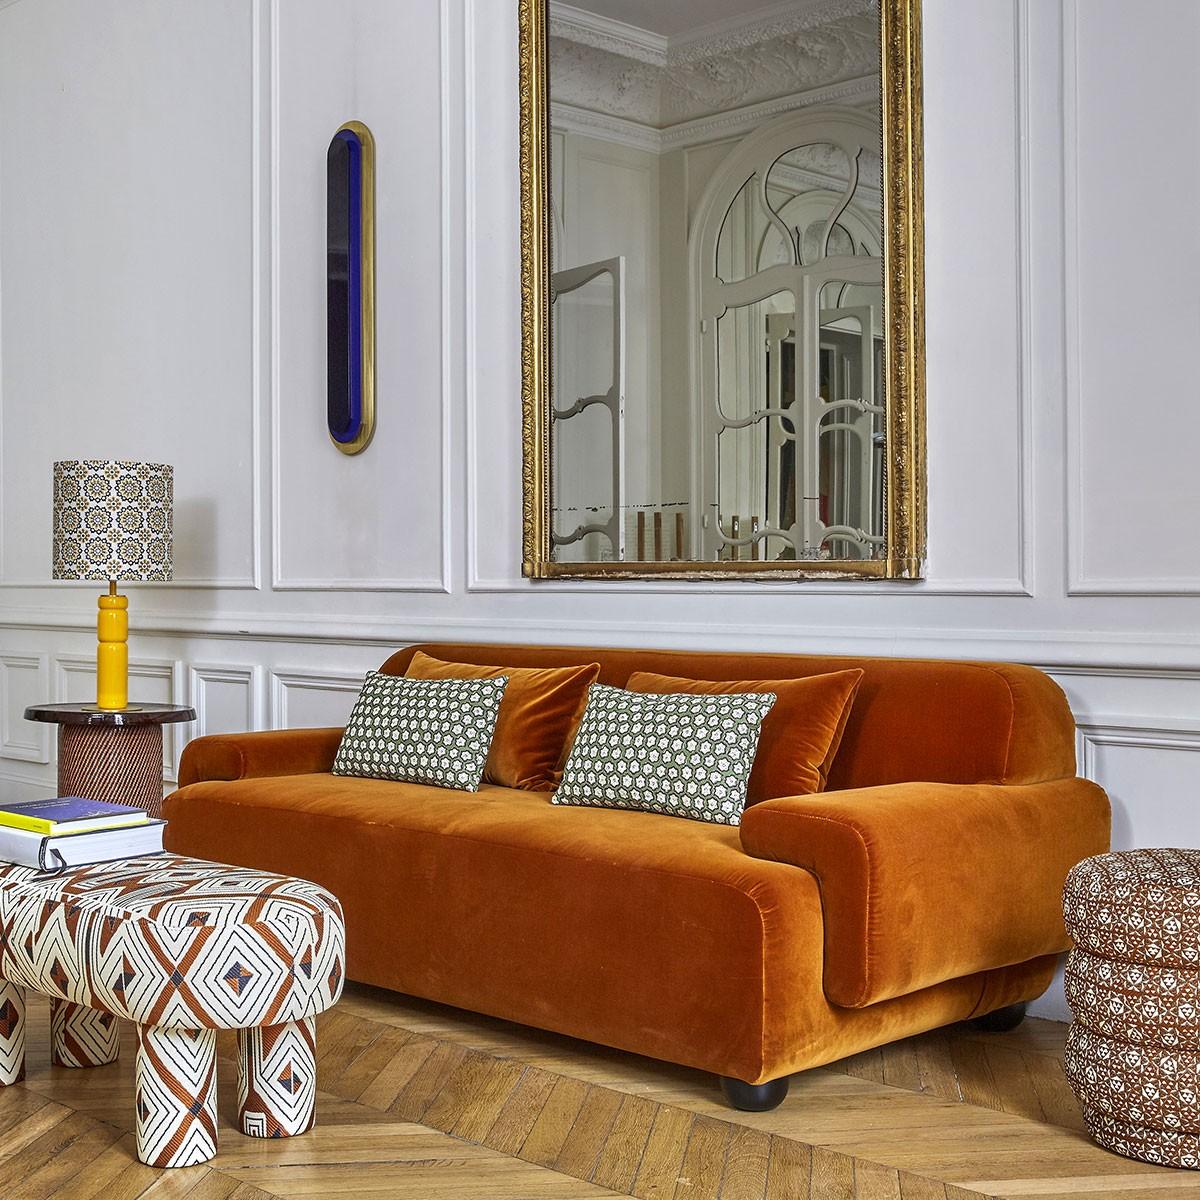 Popus Editions Lena 3 seater sofa in brown como velvet upholstery

It looks like it's straight out of a movie, with its generous curves and wide armrests. It is a real invitation to spend long Sundays with the family, comfortably seated in front